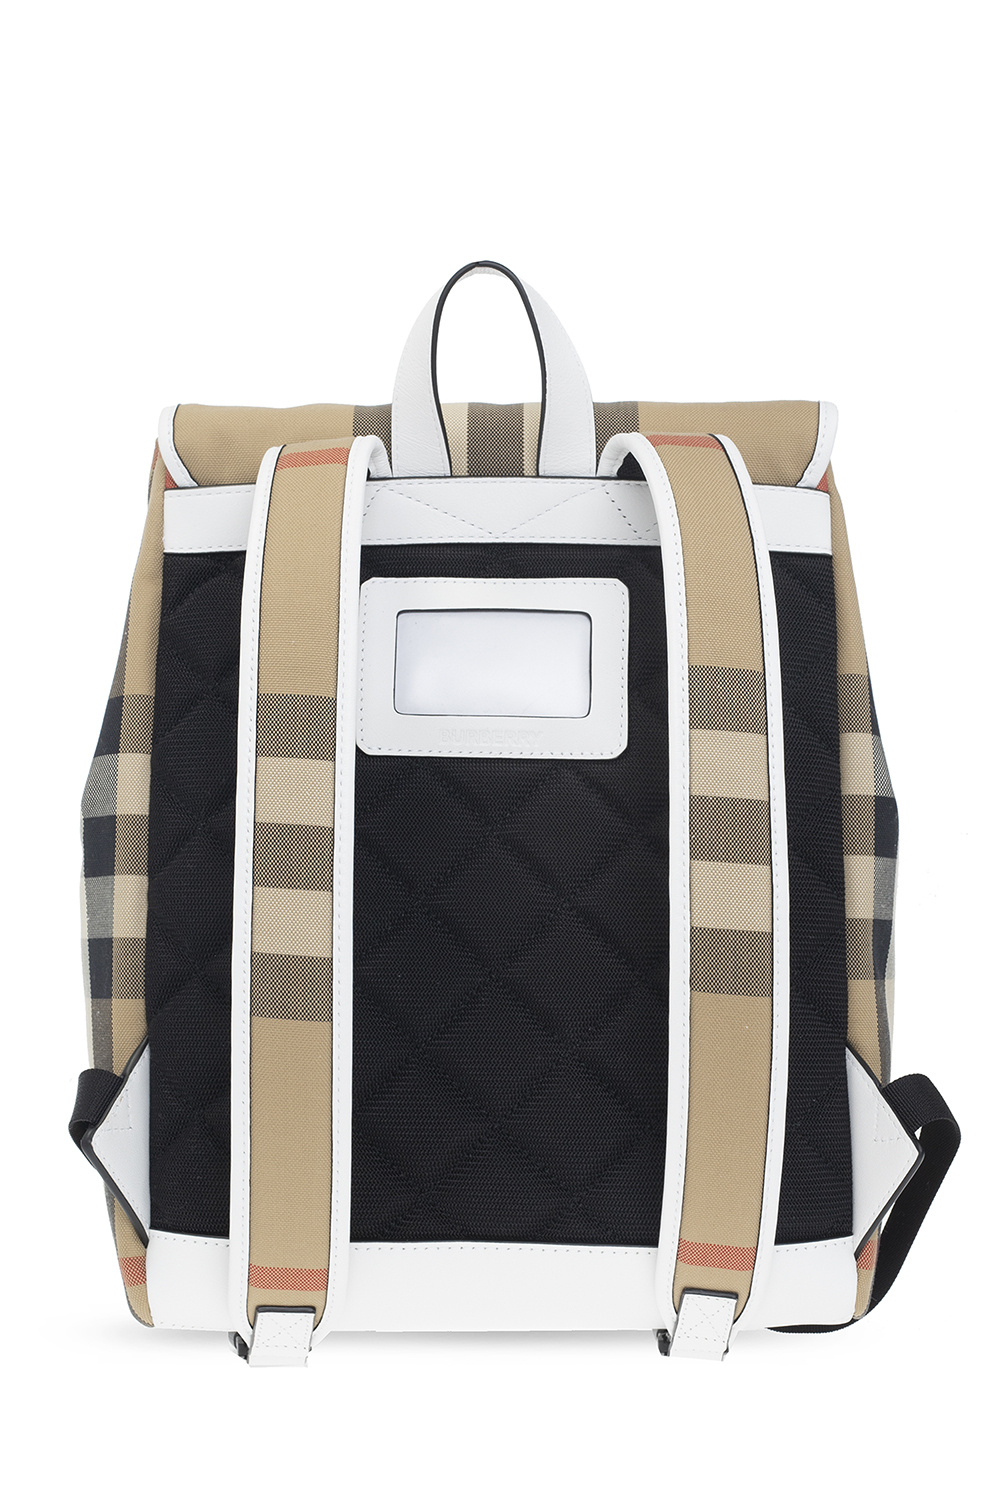 burberry Nude Kids ‘Dewey’ checked backpack